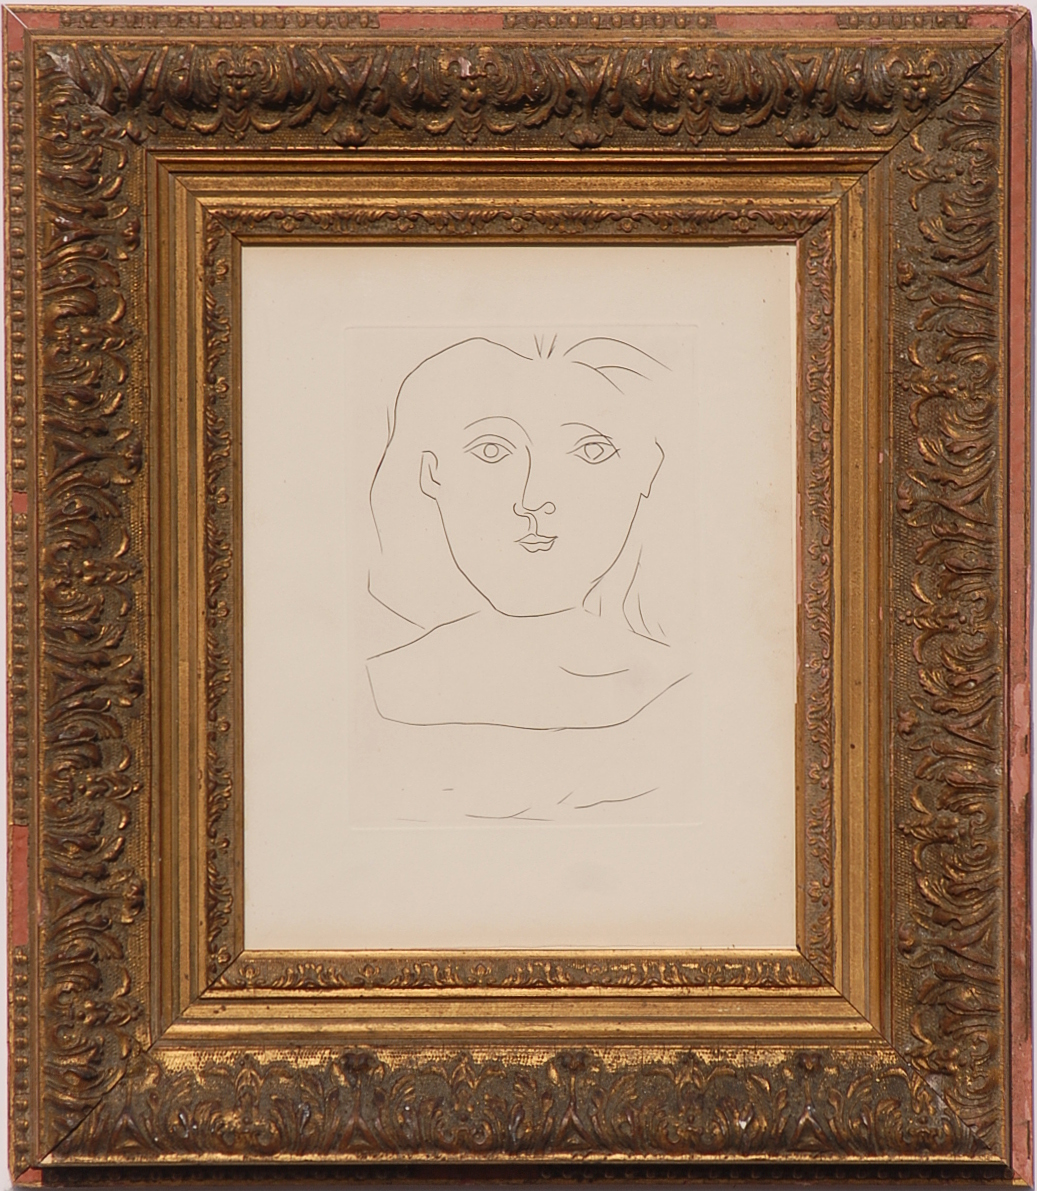 WITHDRAWN - PABLO PICASSO 'Head of a Woman', engraving with burin on Iana wove, signed in the plate,